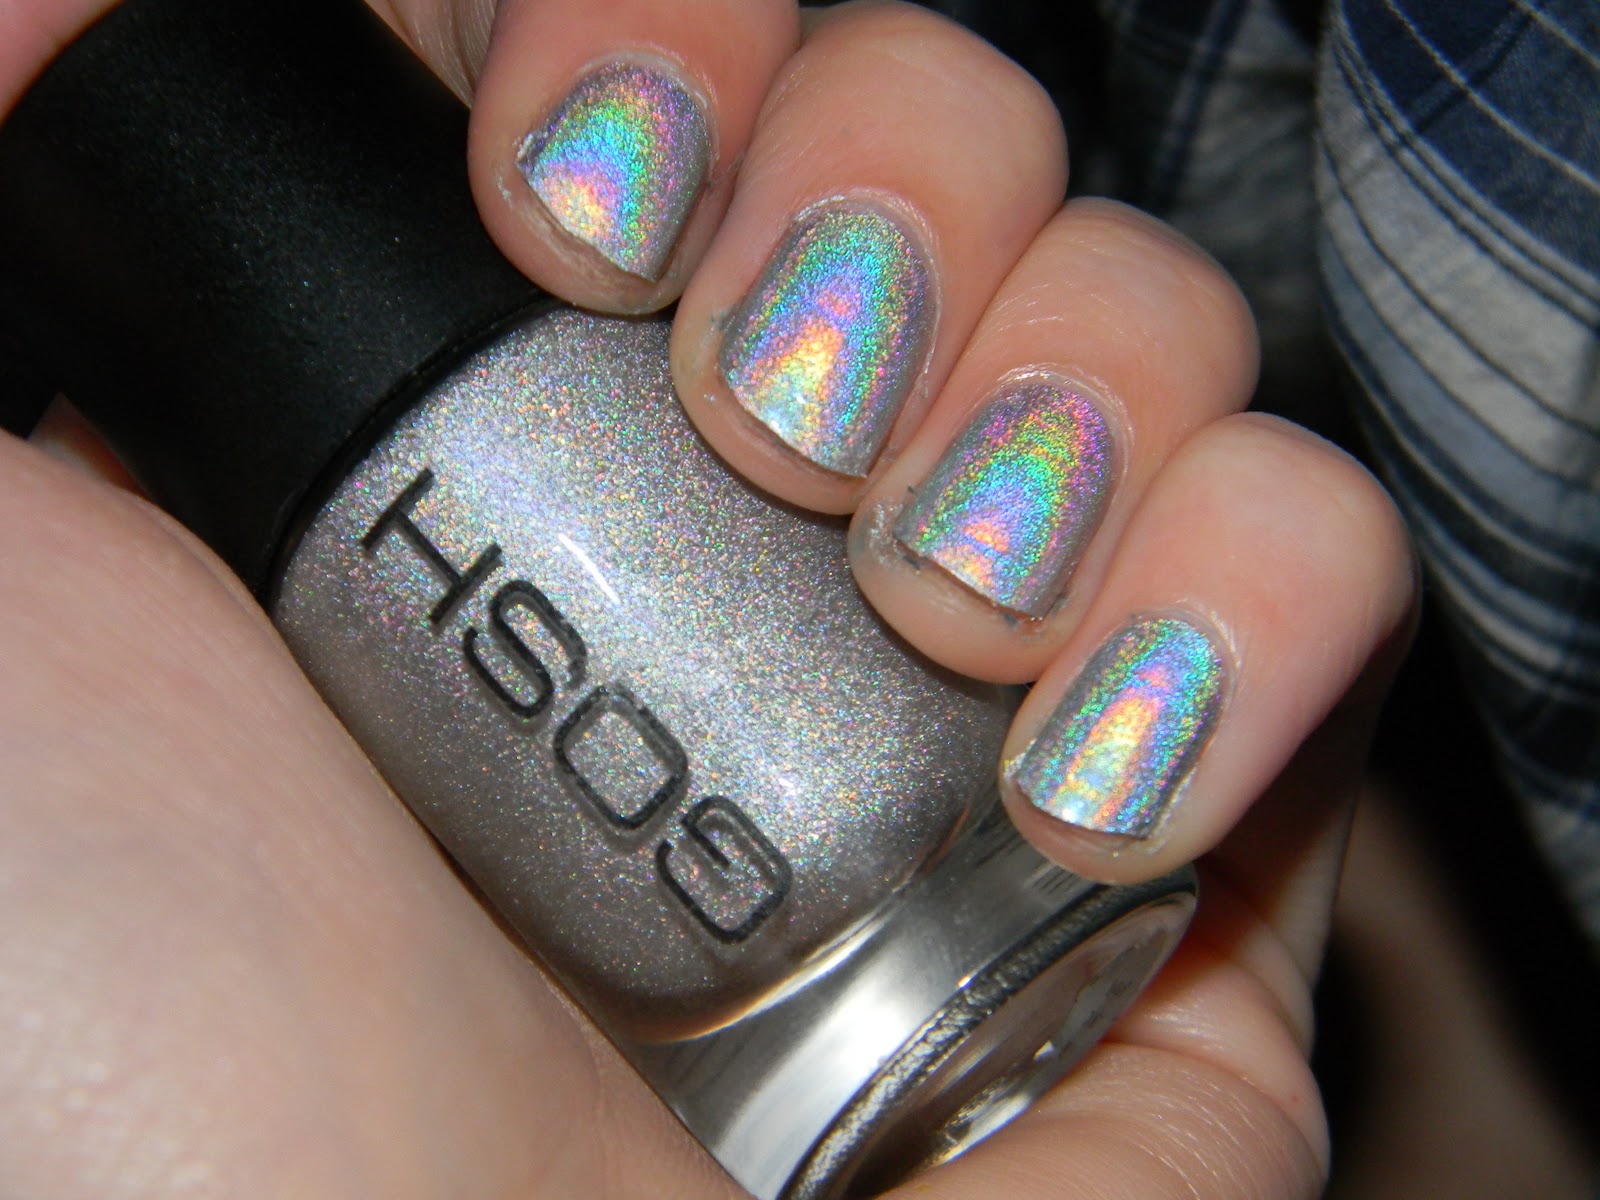 8. "Cobalt Blue and Purple Holographic Nails" - wide 5